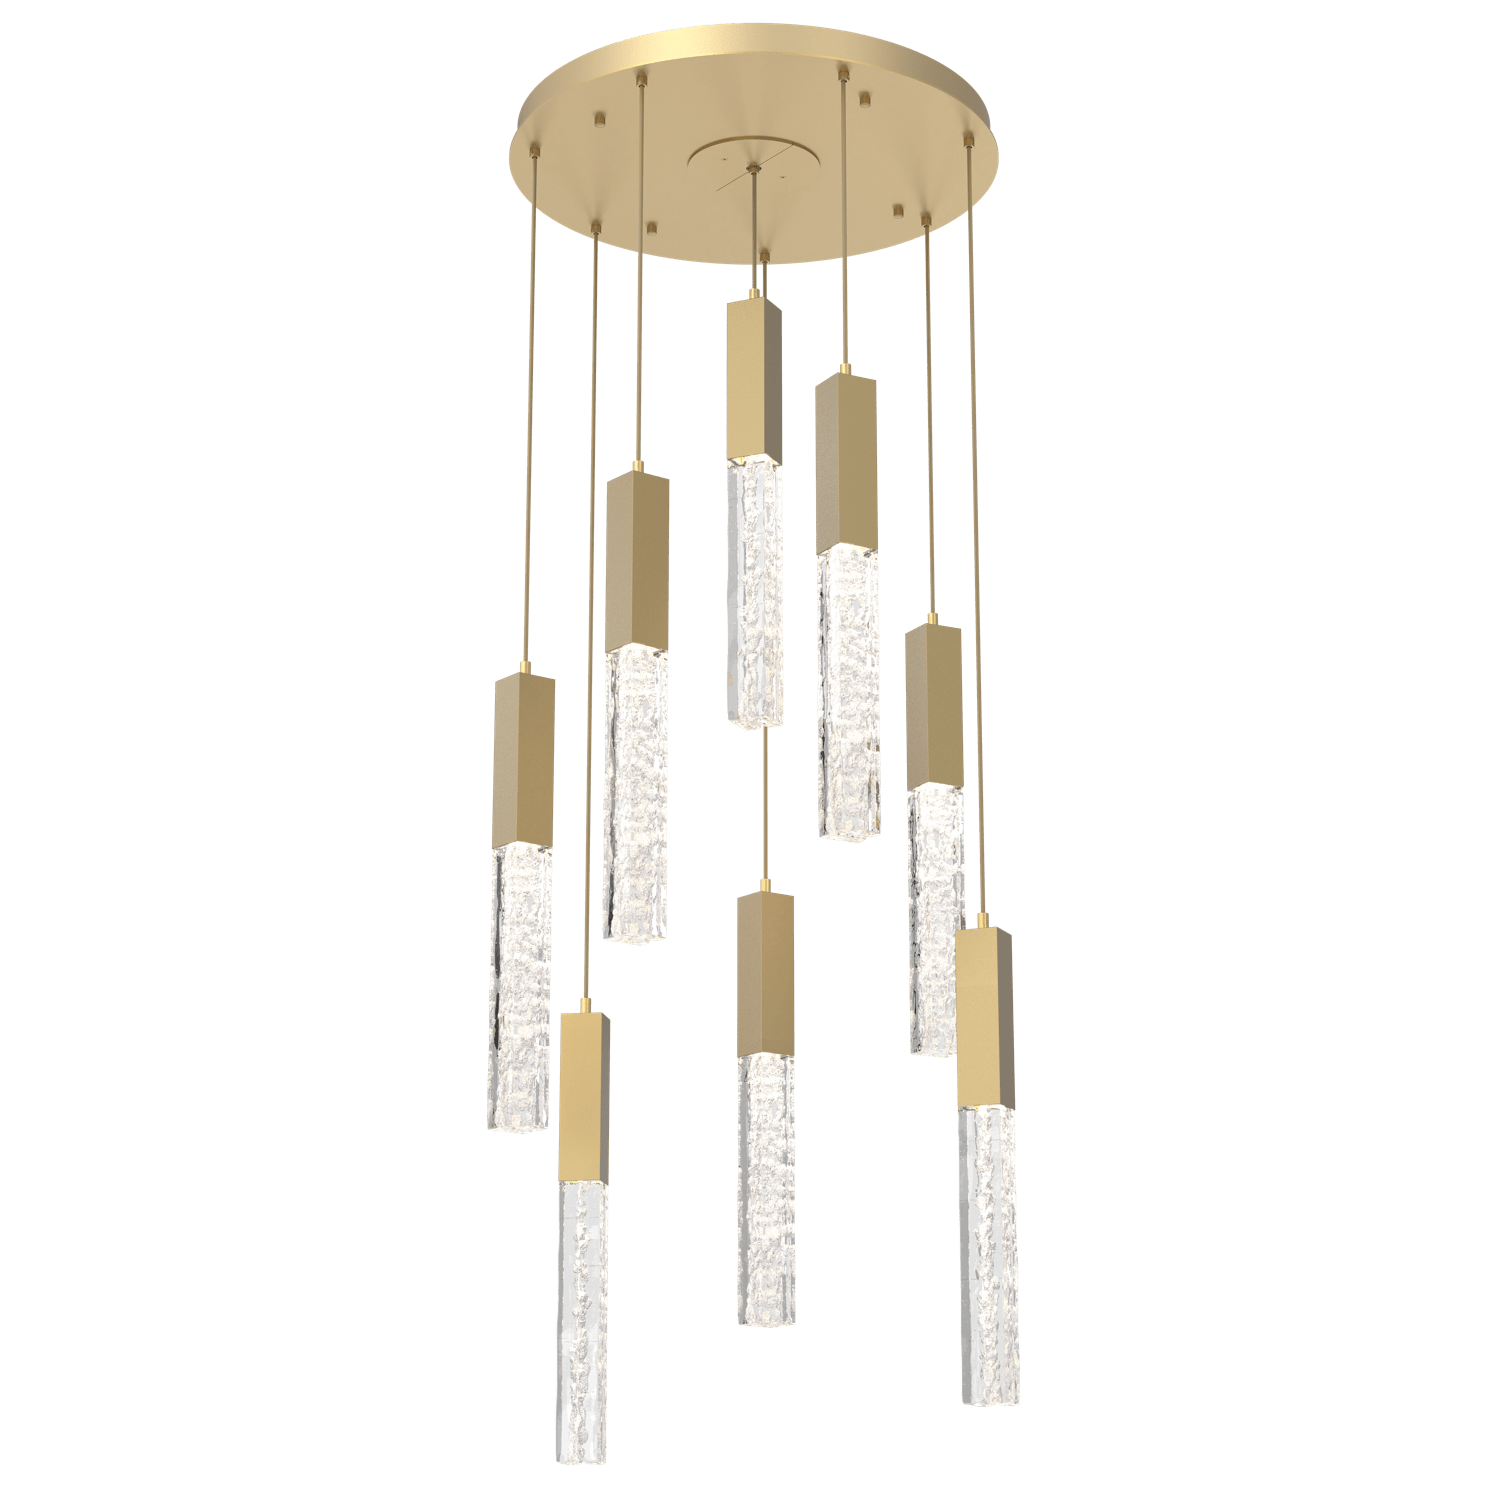 CHB0060-08-GB-GC-Hammerton-Studio-Axis-8-Light-Pendant-Chandelier-with-Gilded-Brass-finish-and-clear-cast-glass-and-LED-lamping